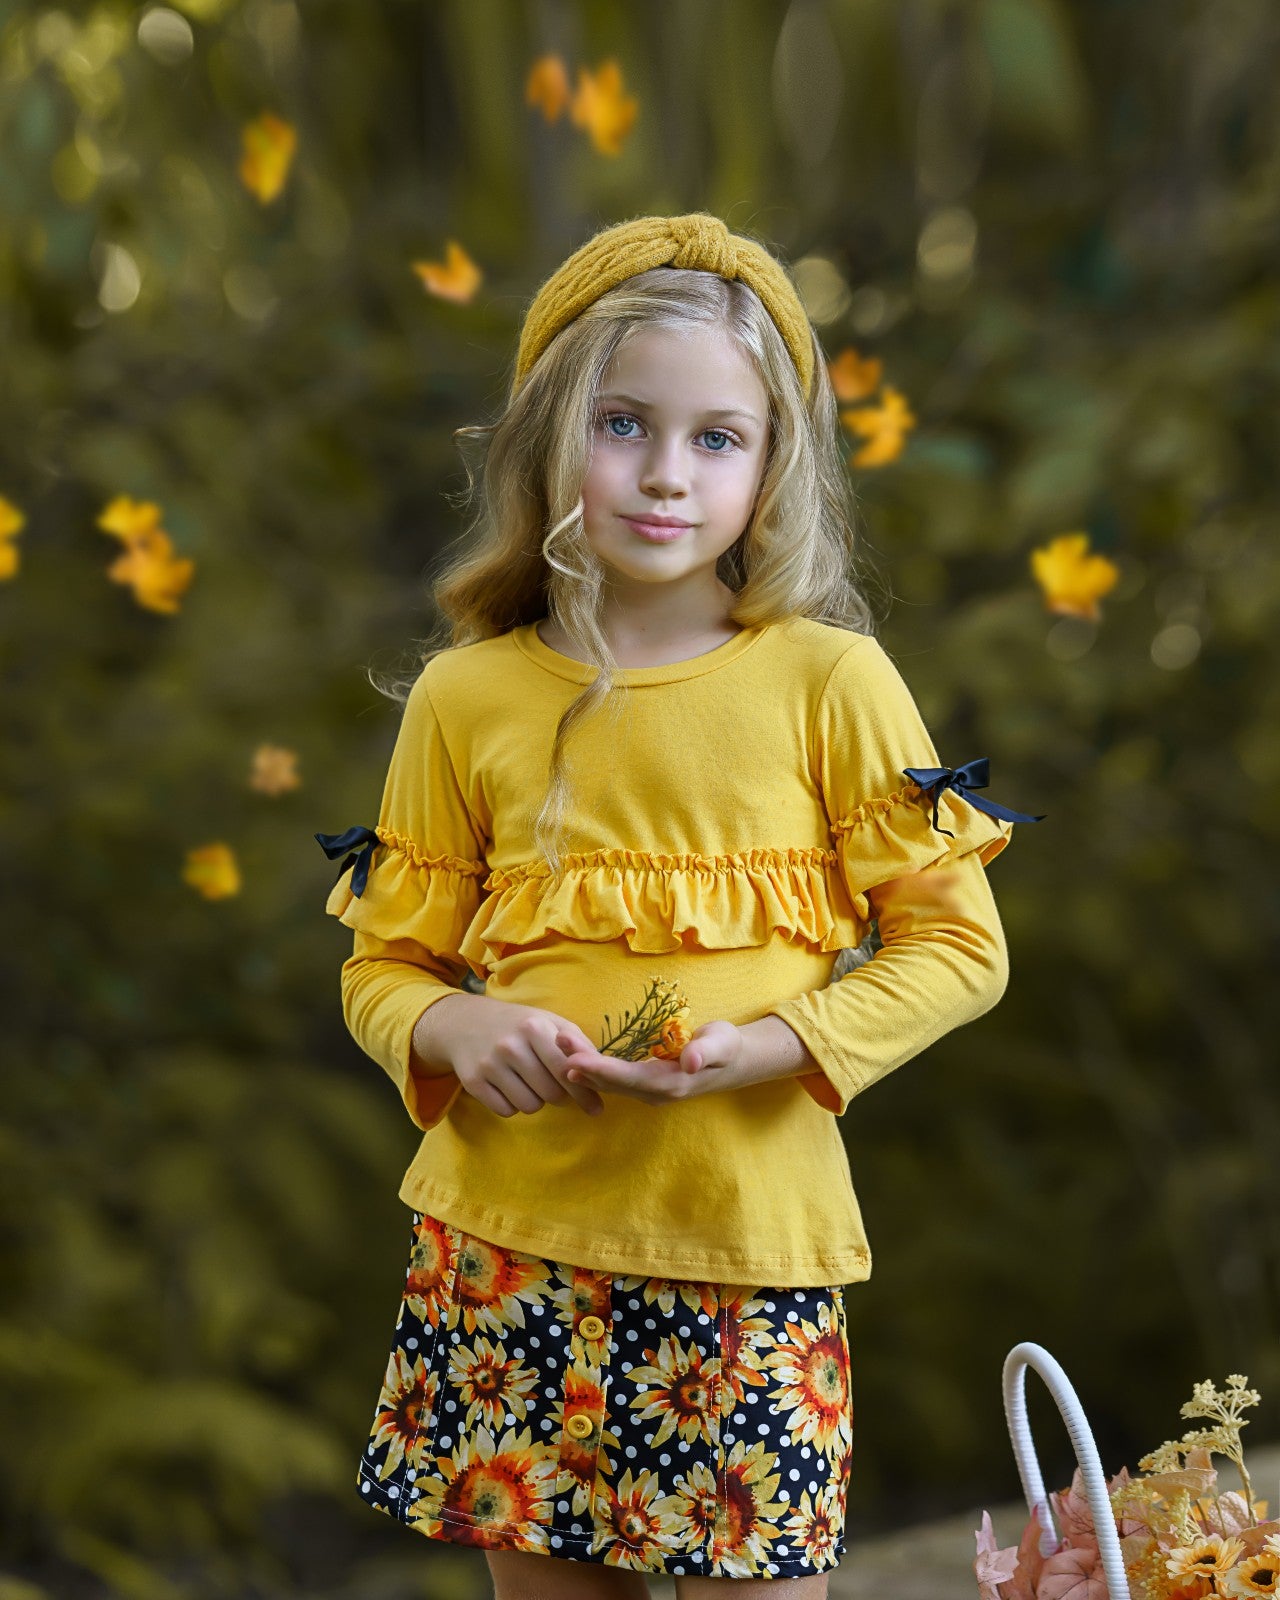 Little girls Fall long-sleeve ruffled top with bow accents and sunflower polka dot print skirt with button applique - Mia Belle Girls